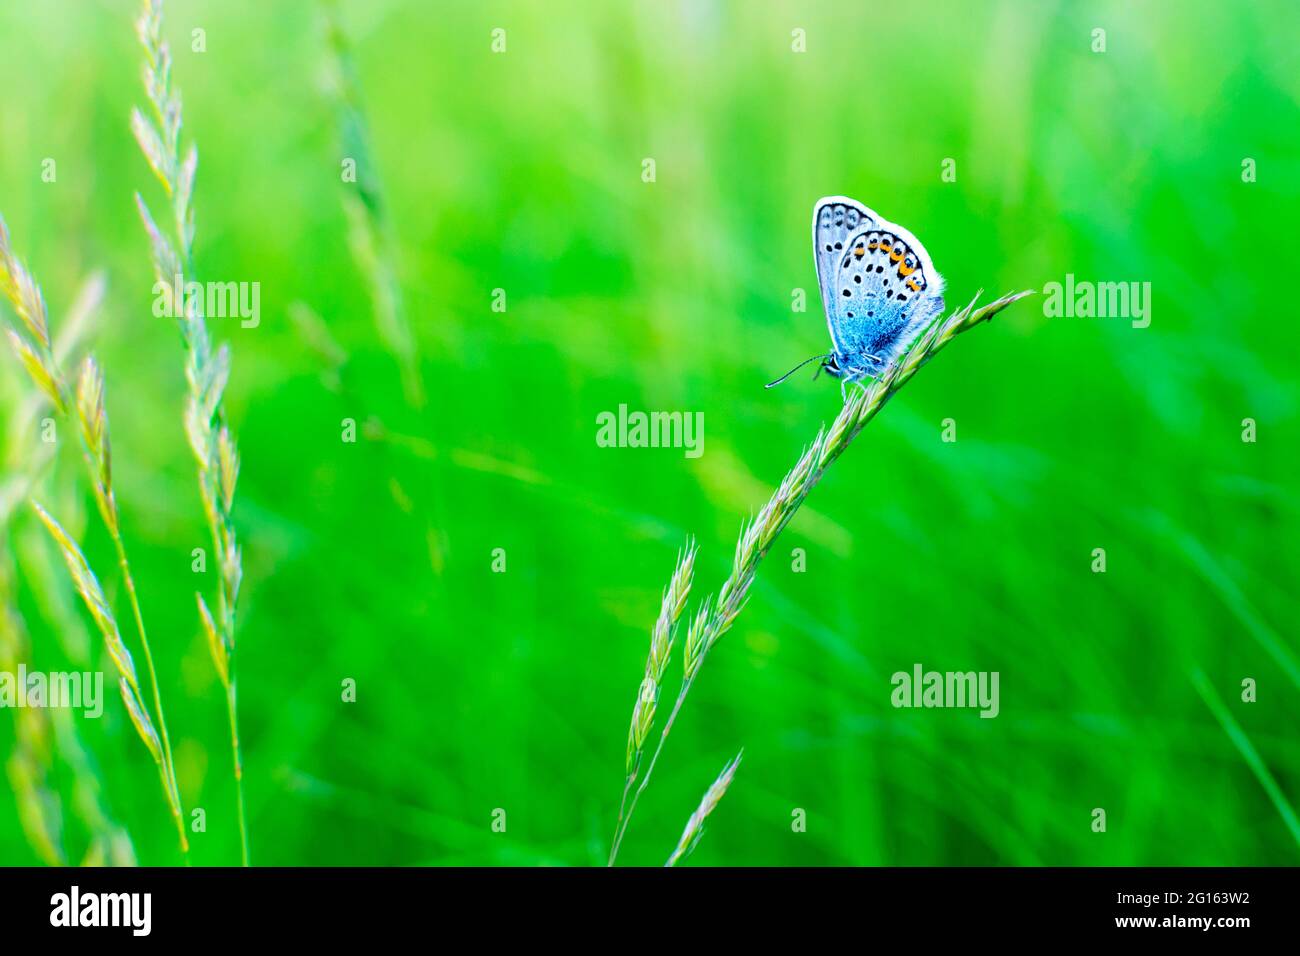 A silver strewn blue butterfly Plebejus argus is resting and sitting on the grass against a blurred green background. Common small blue butterfly in Stock Photo